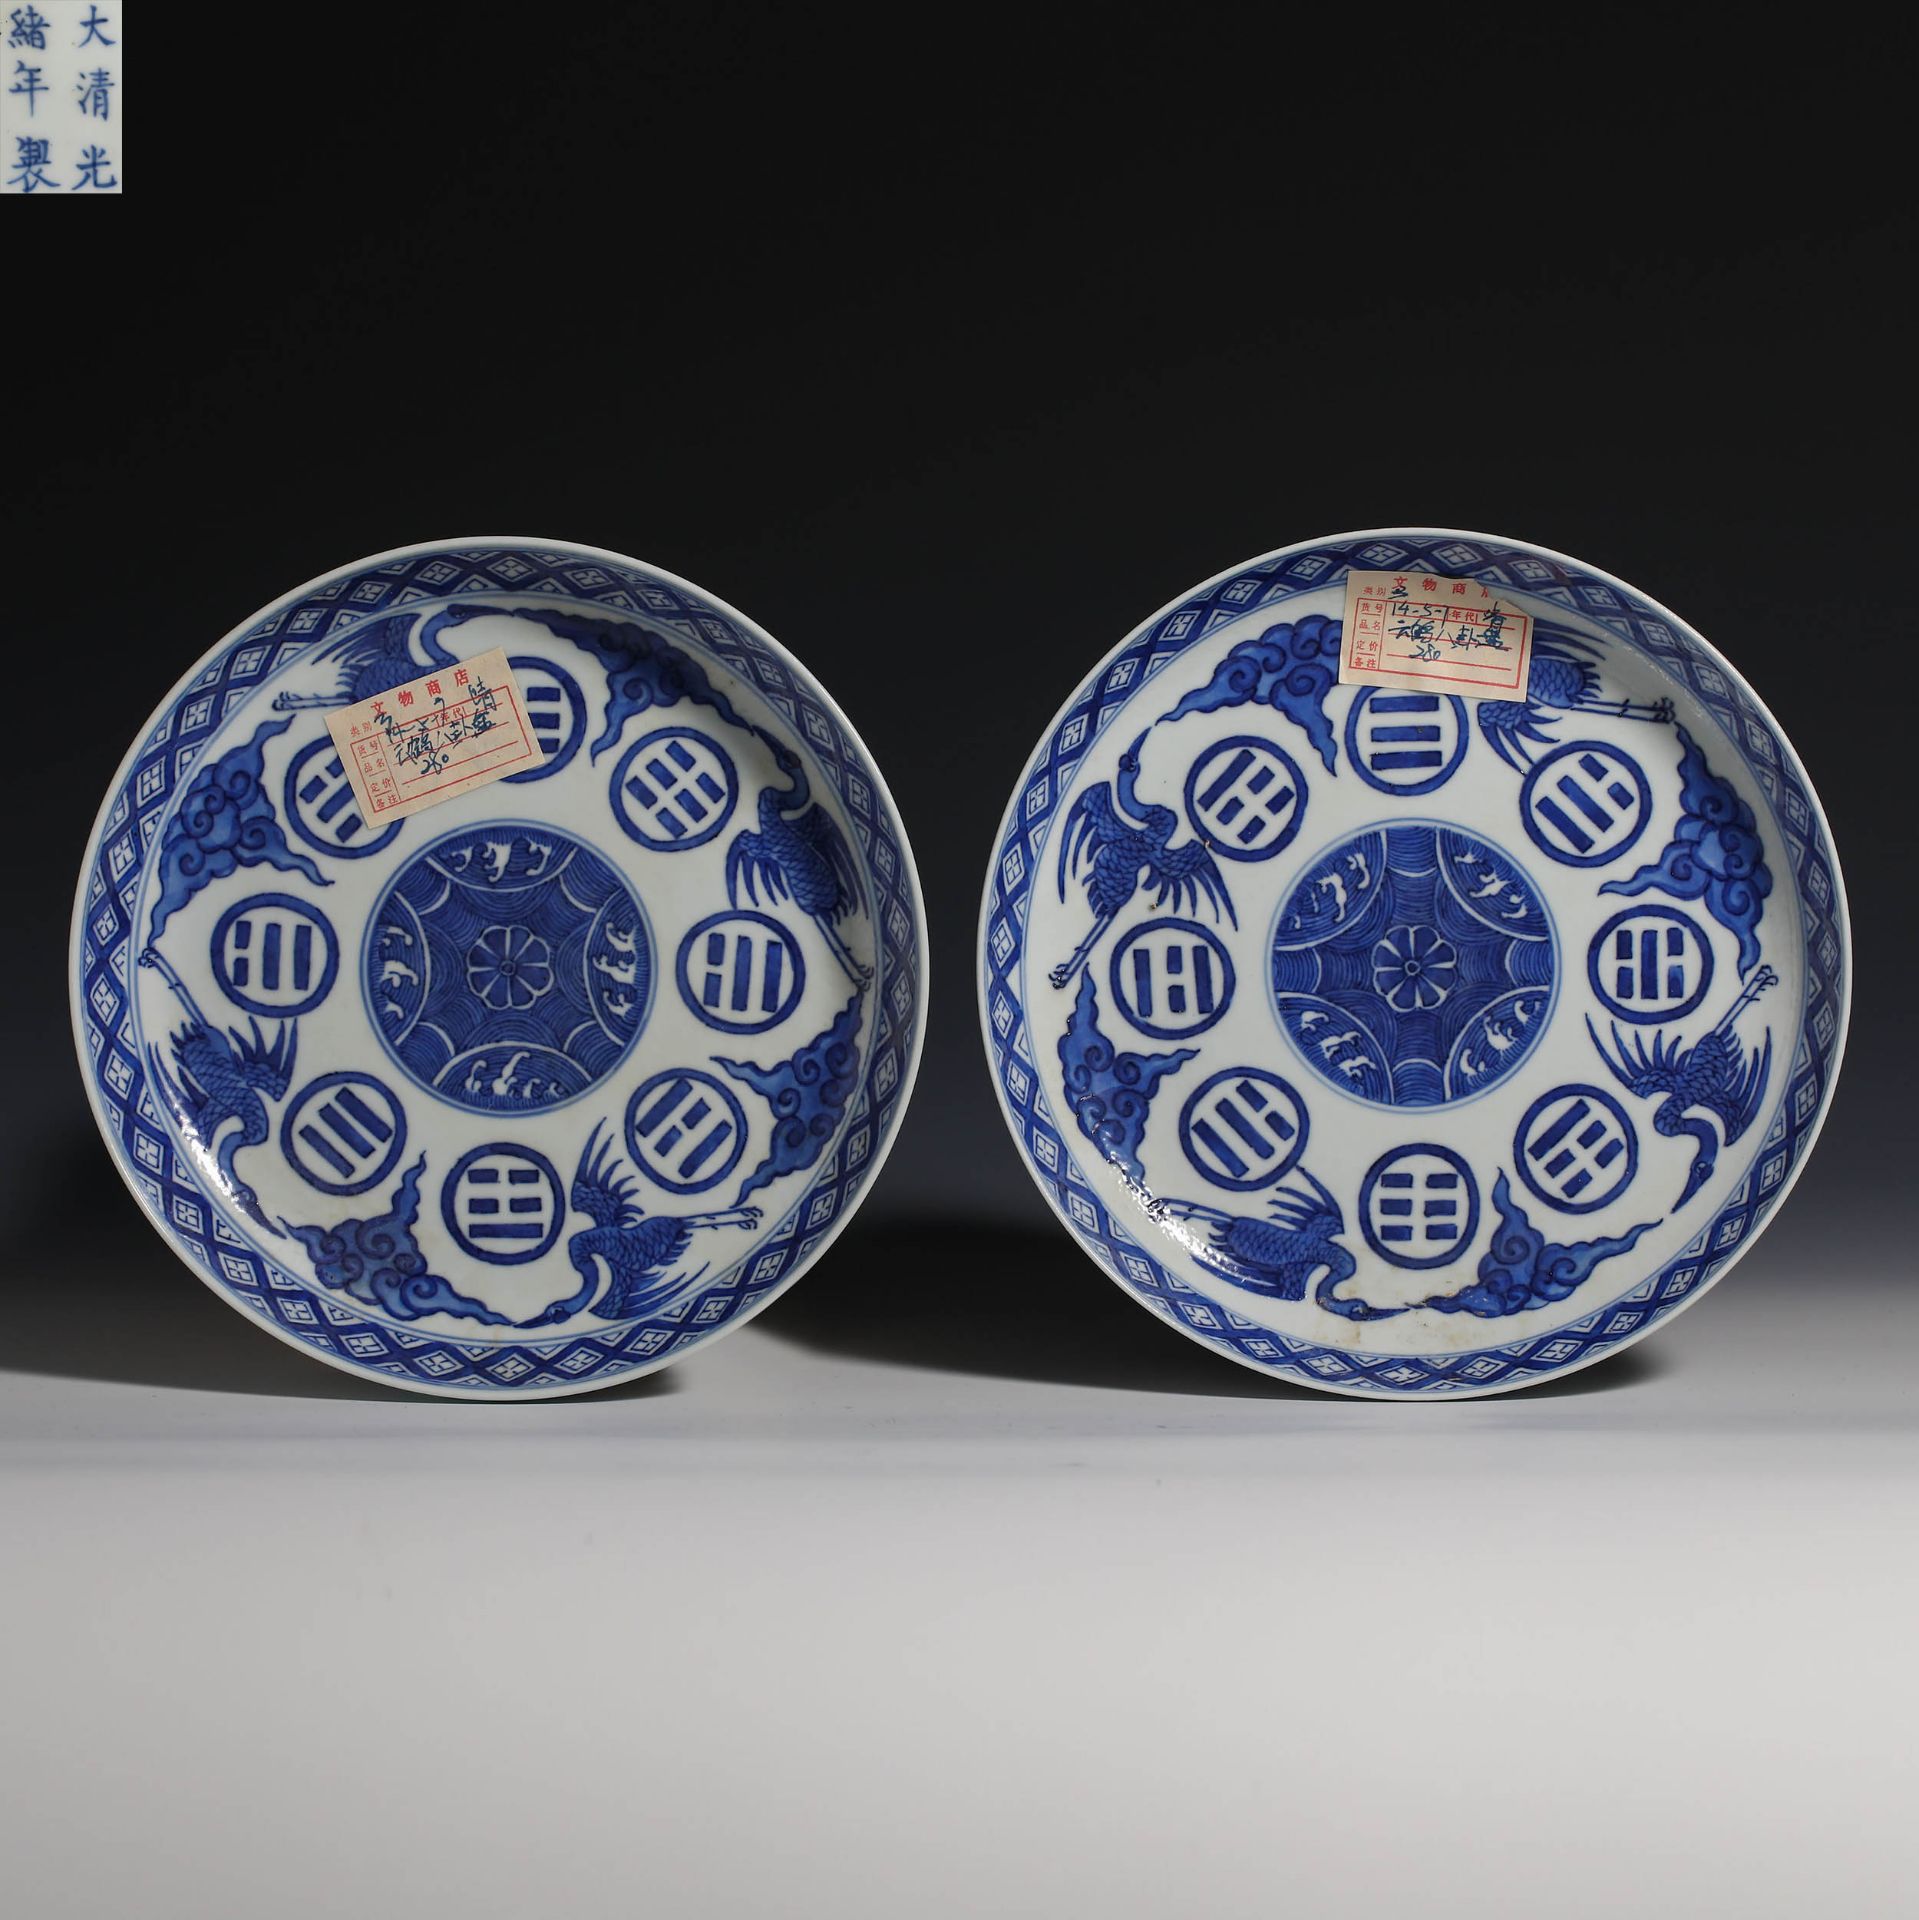 A Pair of Blue and White Gossip Plates with Cloud and Crane Pattern, 18th century